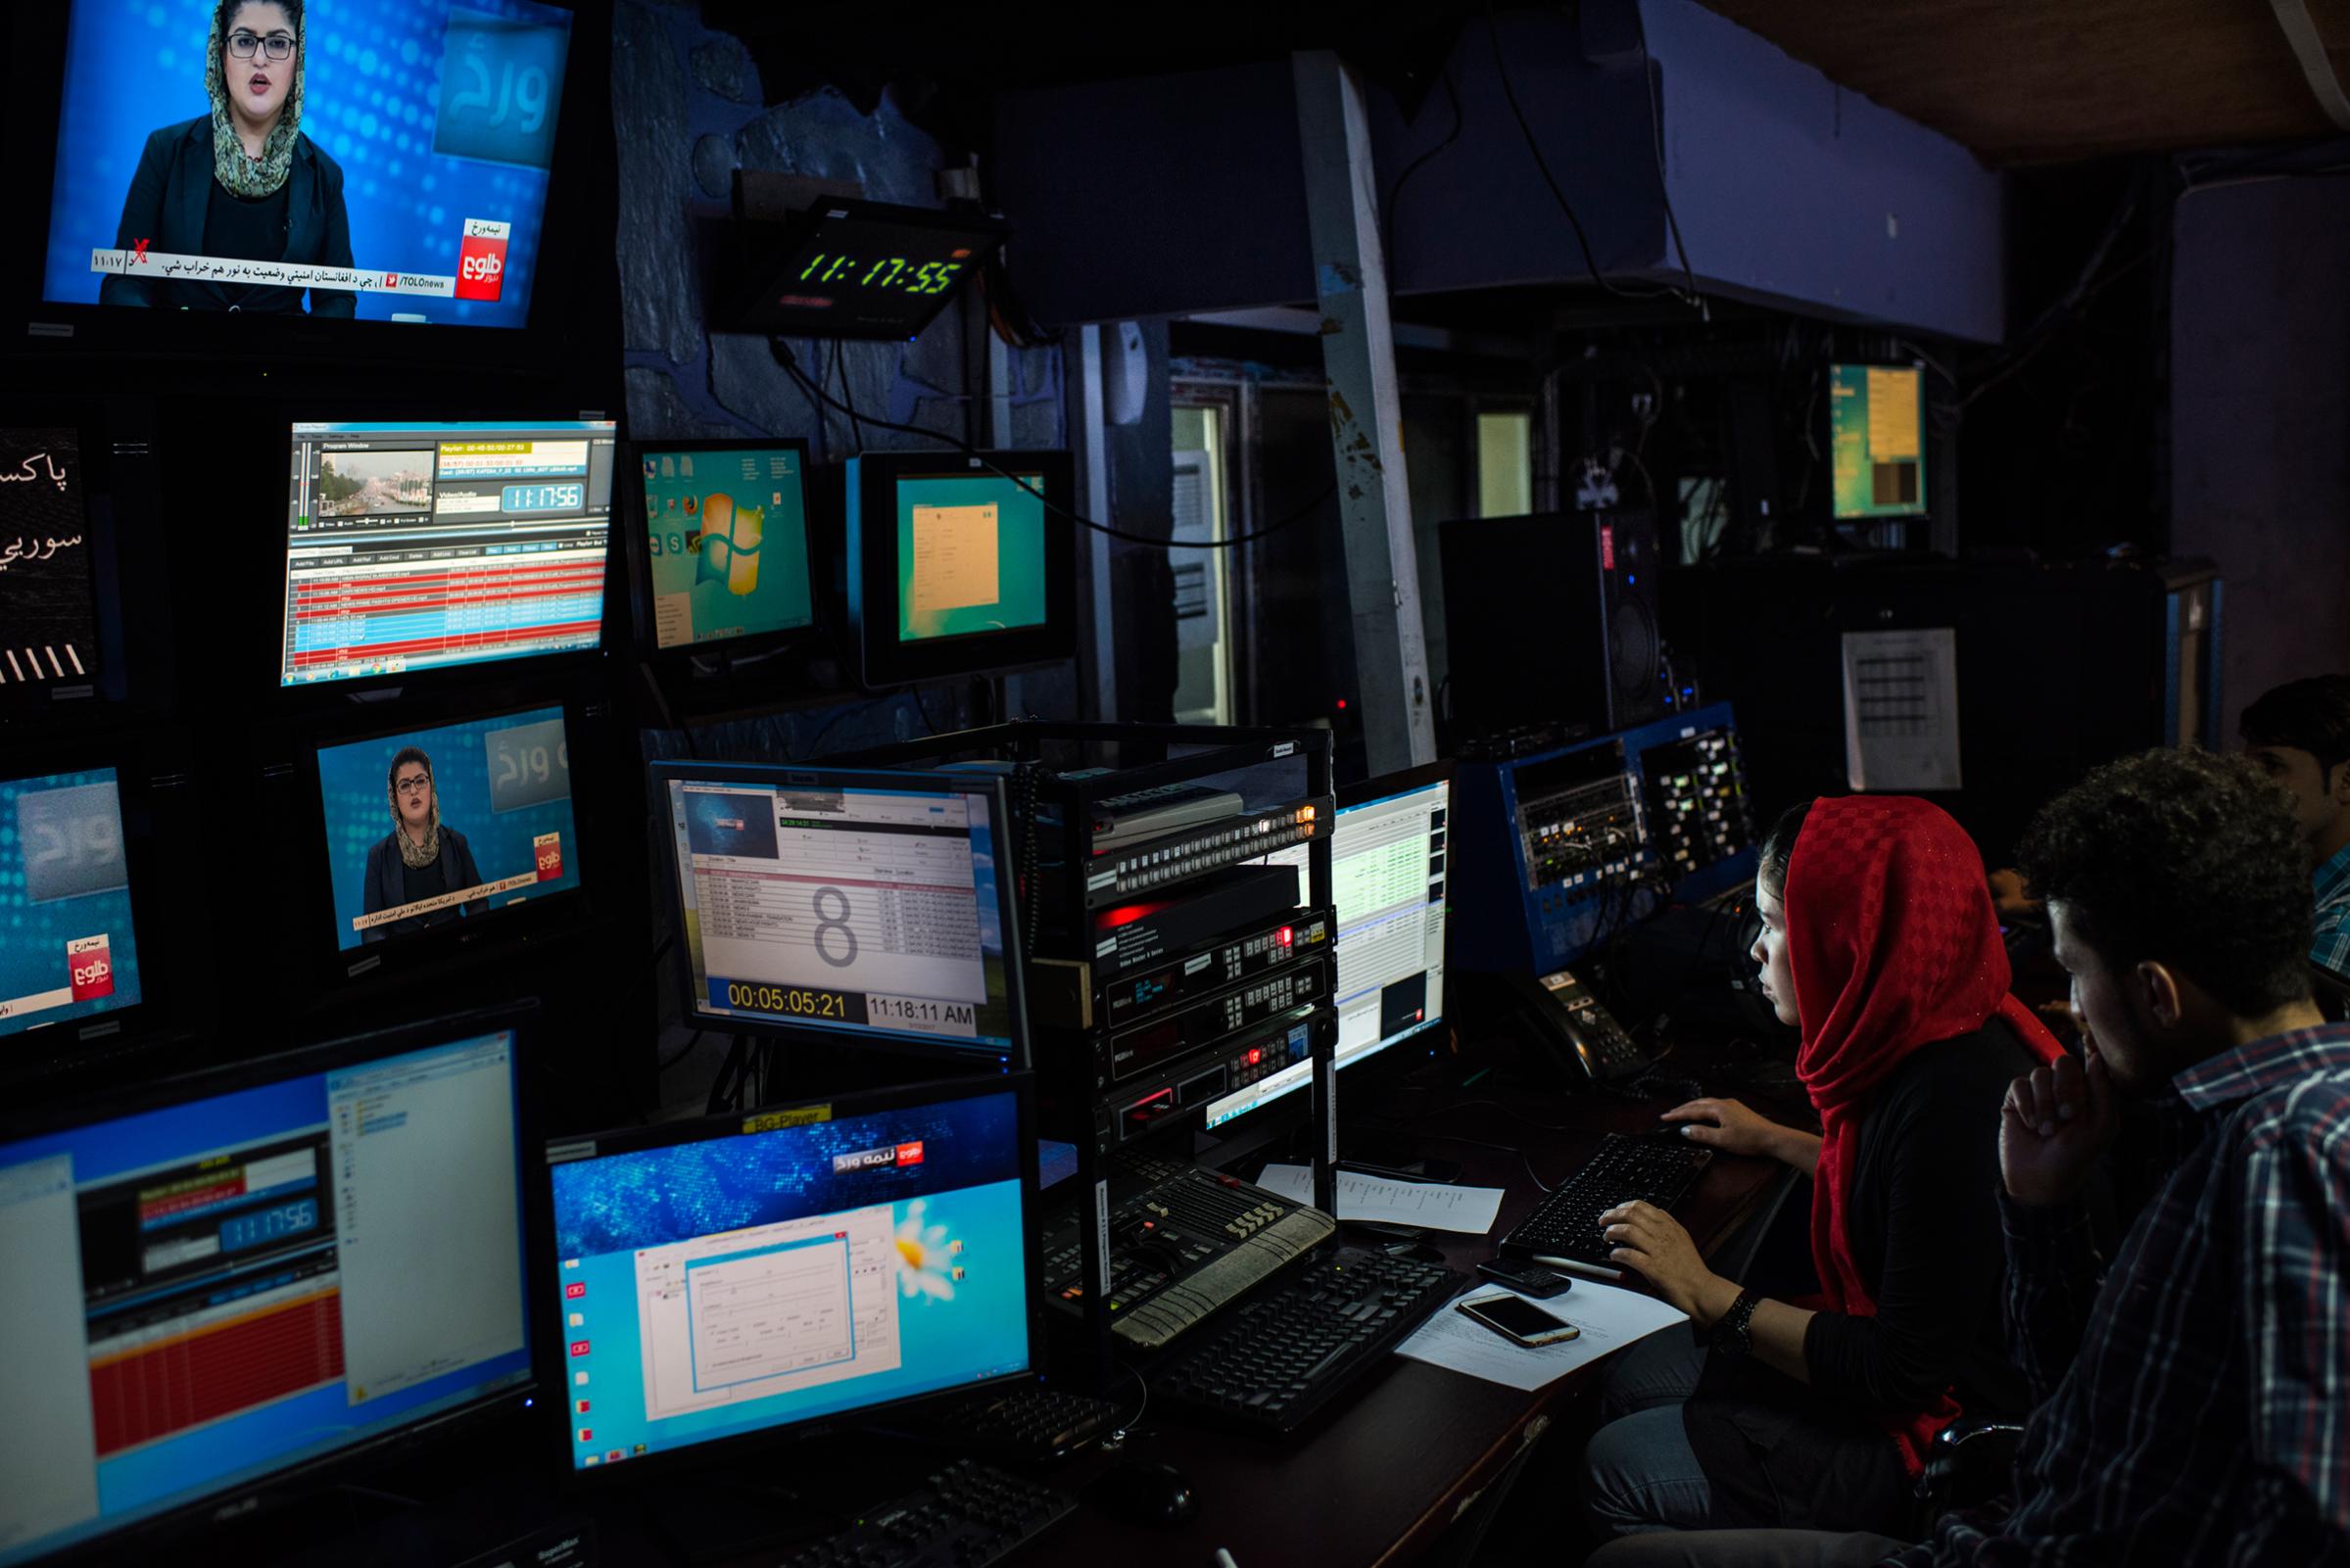 The production room for Tolo News, Afghanistan's most popular television network, in Kabul on May 13, 2017.